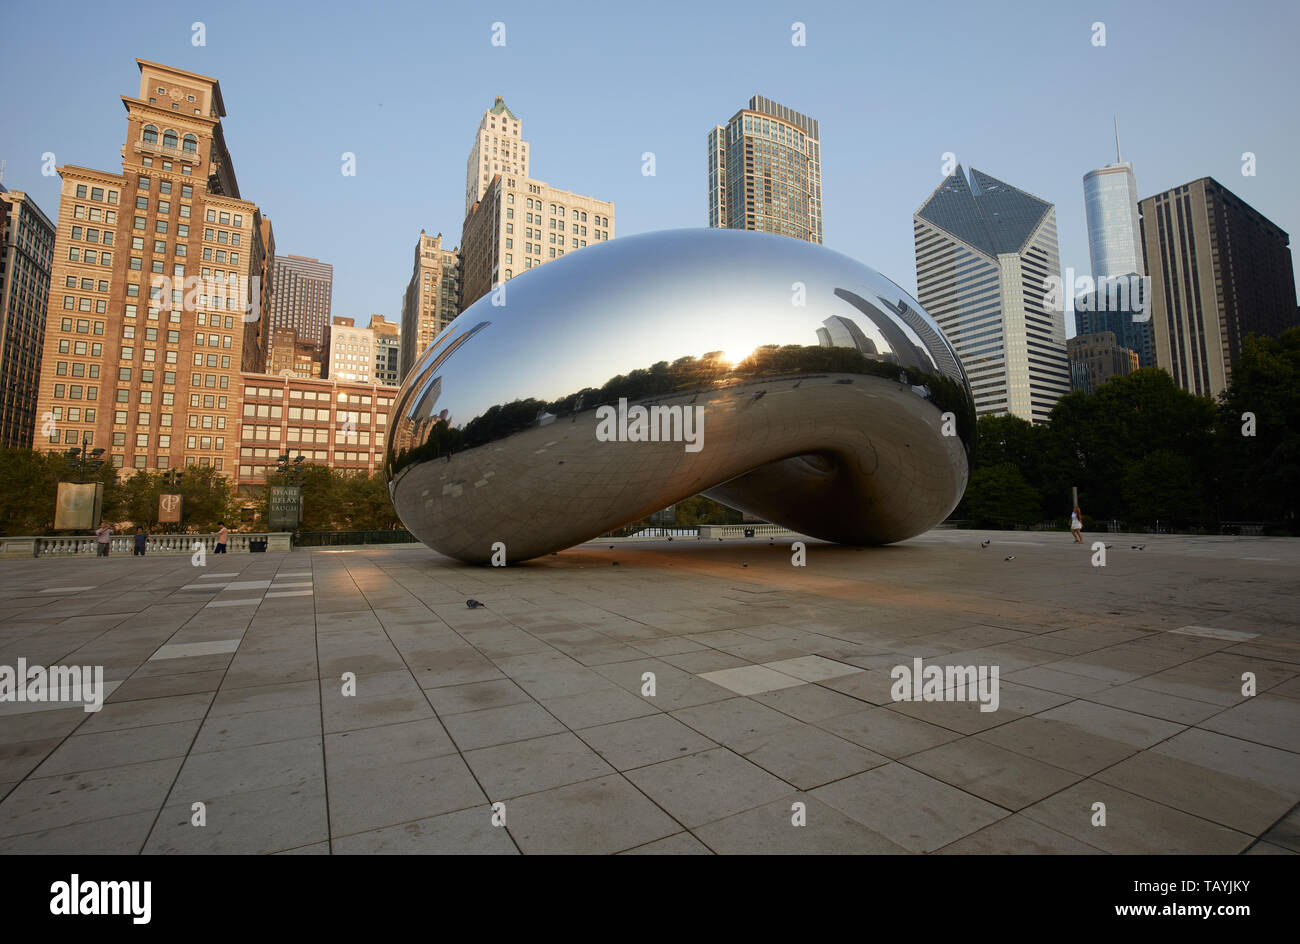 The sculpture Cloud Gate, also known as the Bean, at Millenium Park, Chicago, Illinois, United states Stock Photo